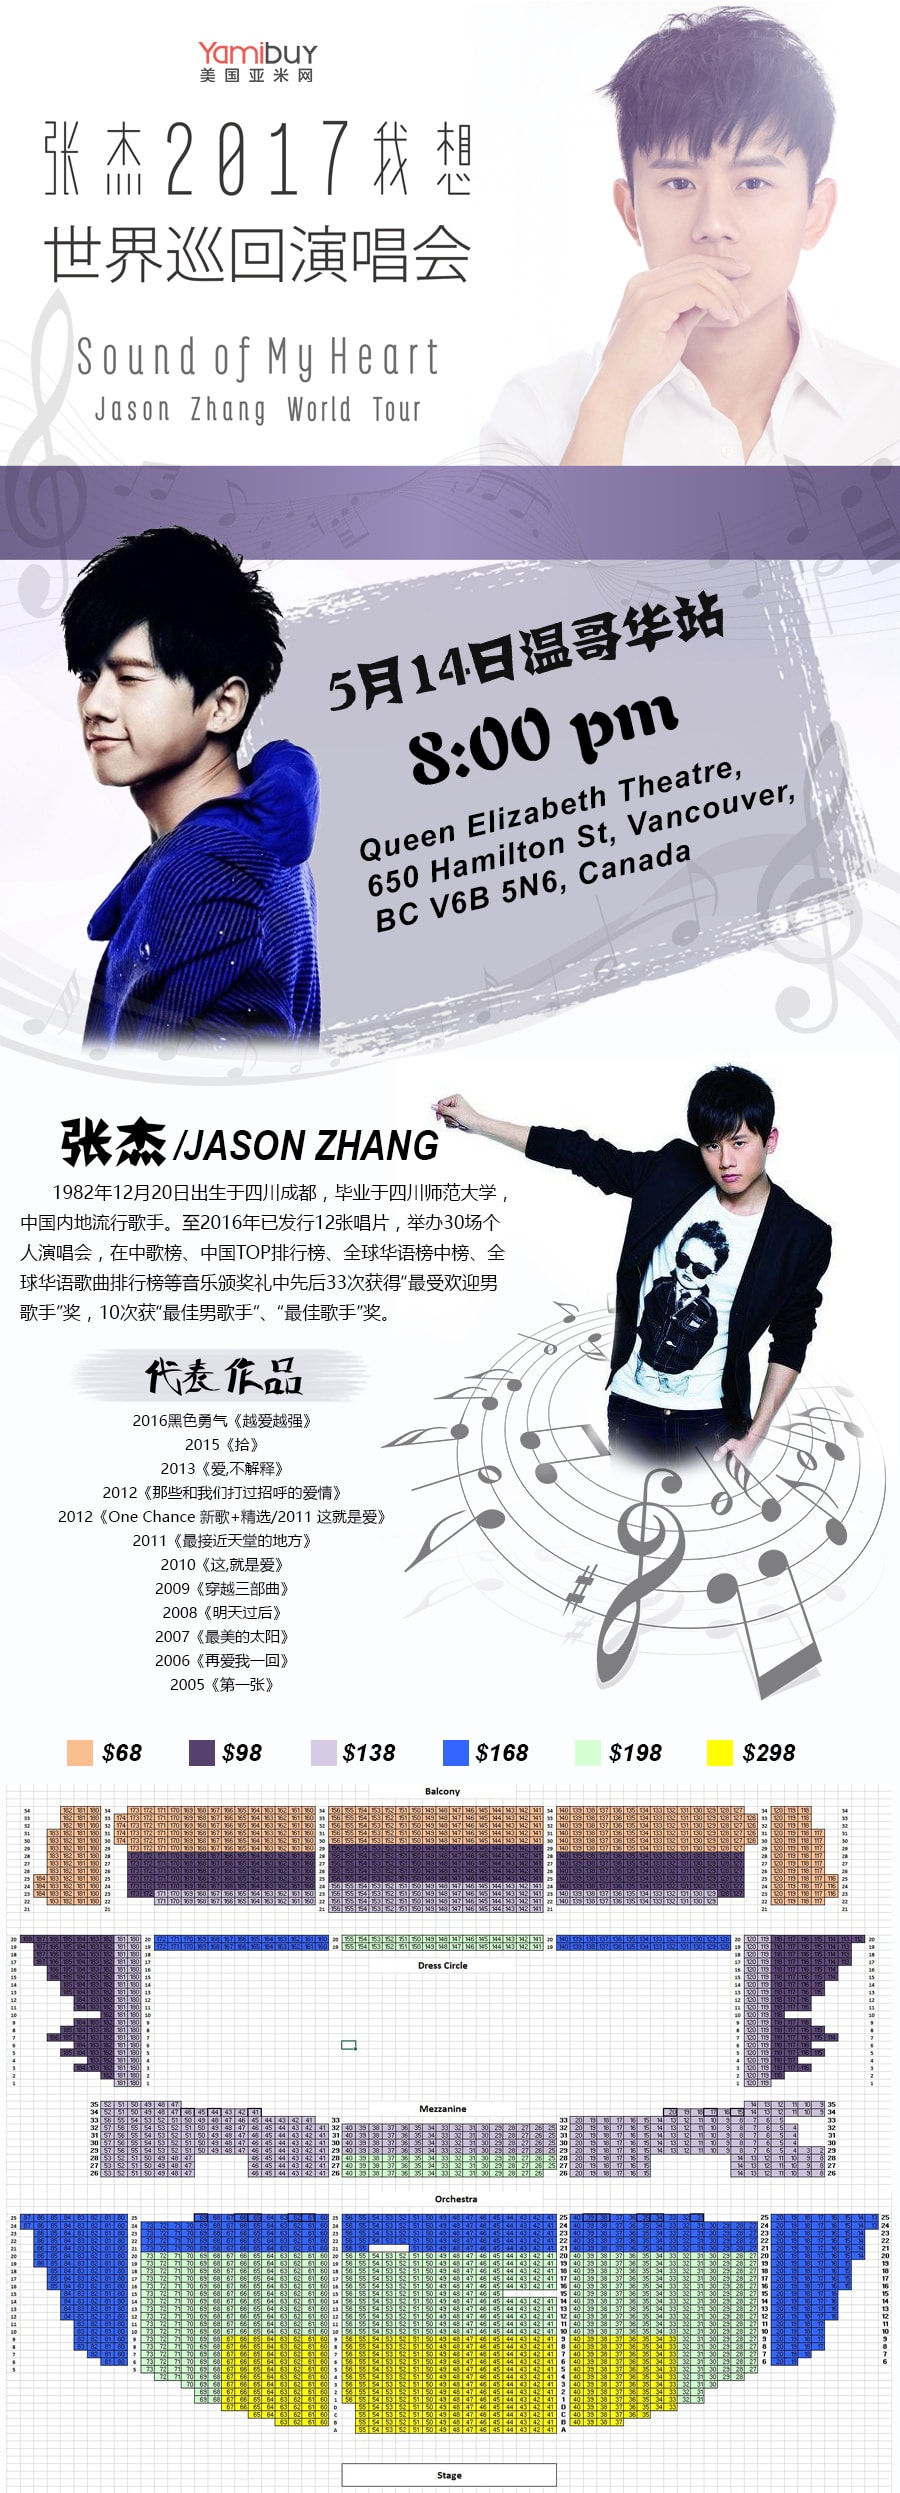 Jason Zhang 2017 SOUND OF MY HEART World Tour May.14th  Vancouver  $298